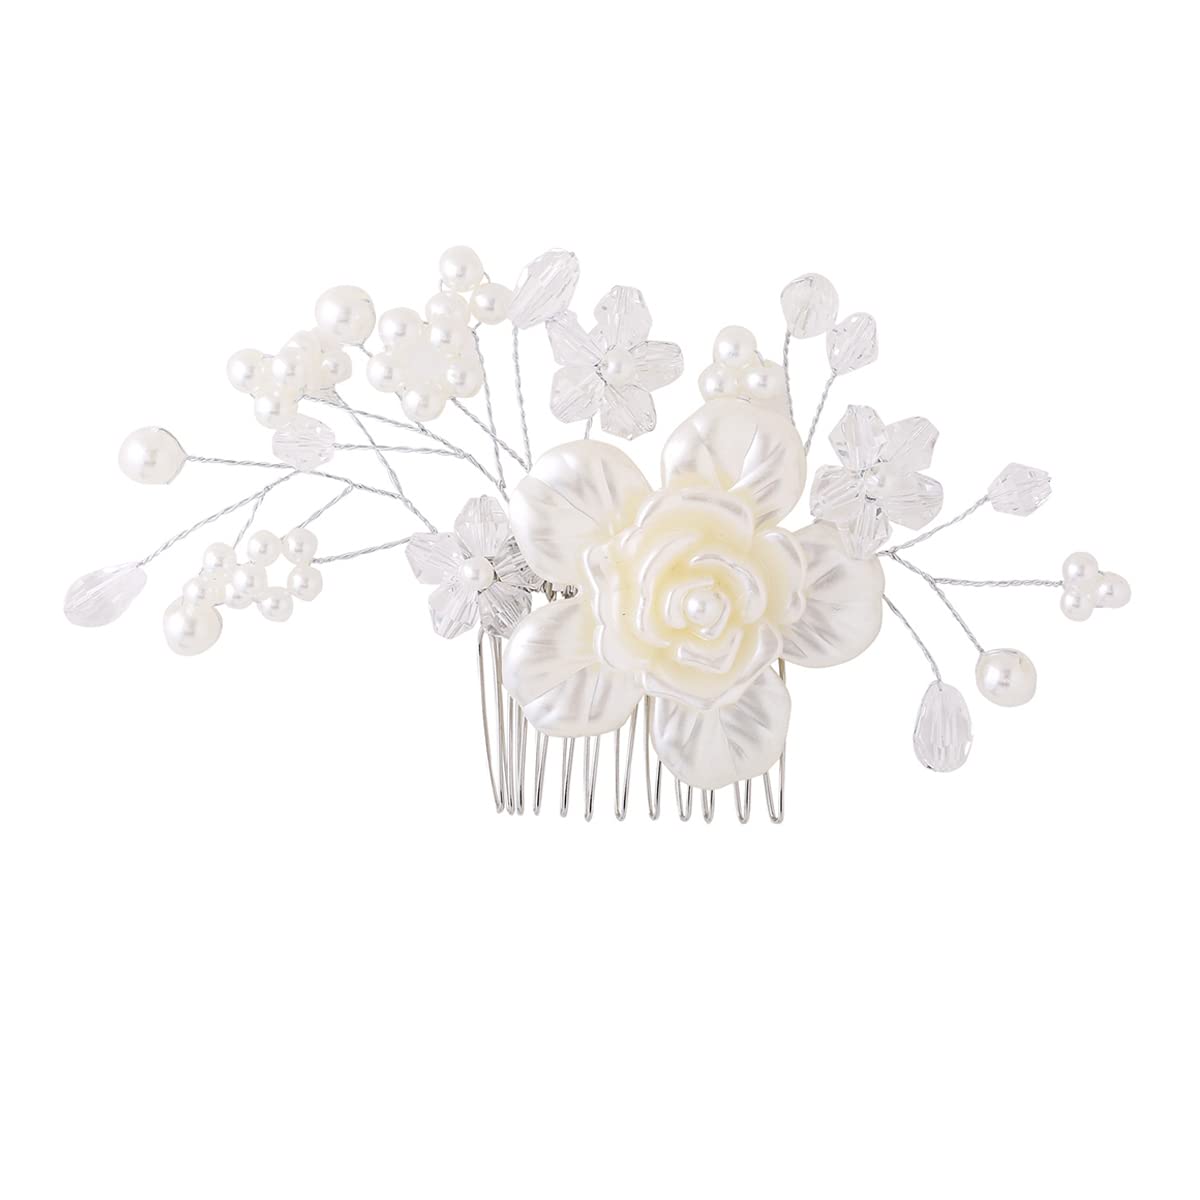 Yellow Chimes Comb Pin for Women Hair Accessories for Women Floral Comb Clips for Hair for Women White Pearl Hair Pin Bridal Hair Accessories for Wedding Side Pin / Comb Pin / Juda Pin Accessories for Women